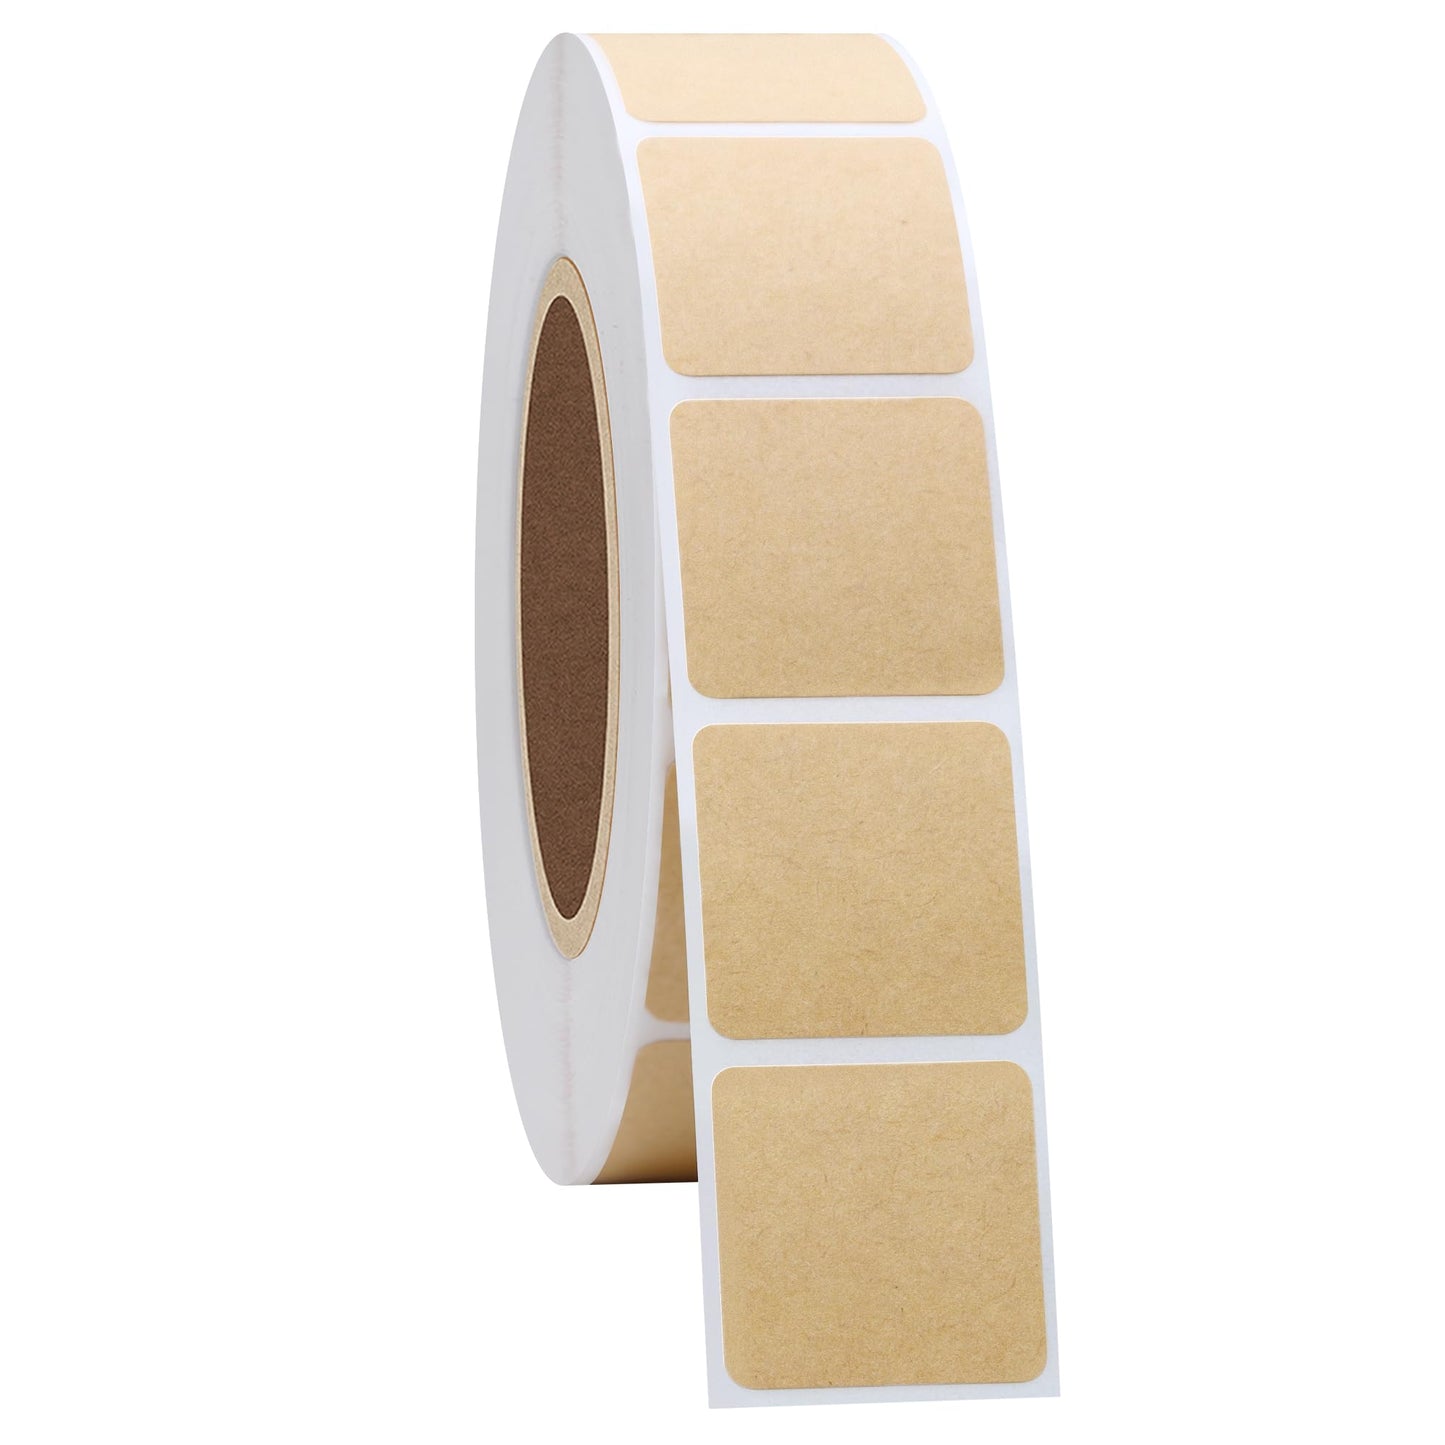 Hybsk 0.85 Inch Square Blank Kraft Shooting Target Pasters | Writable Inventory Organizer Labels | Total 1,000 Adhesive Labels Per Roll